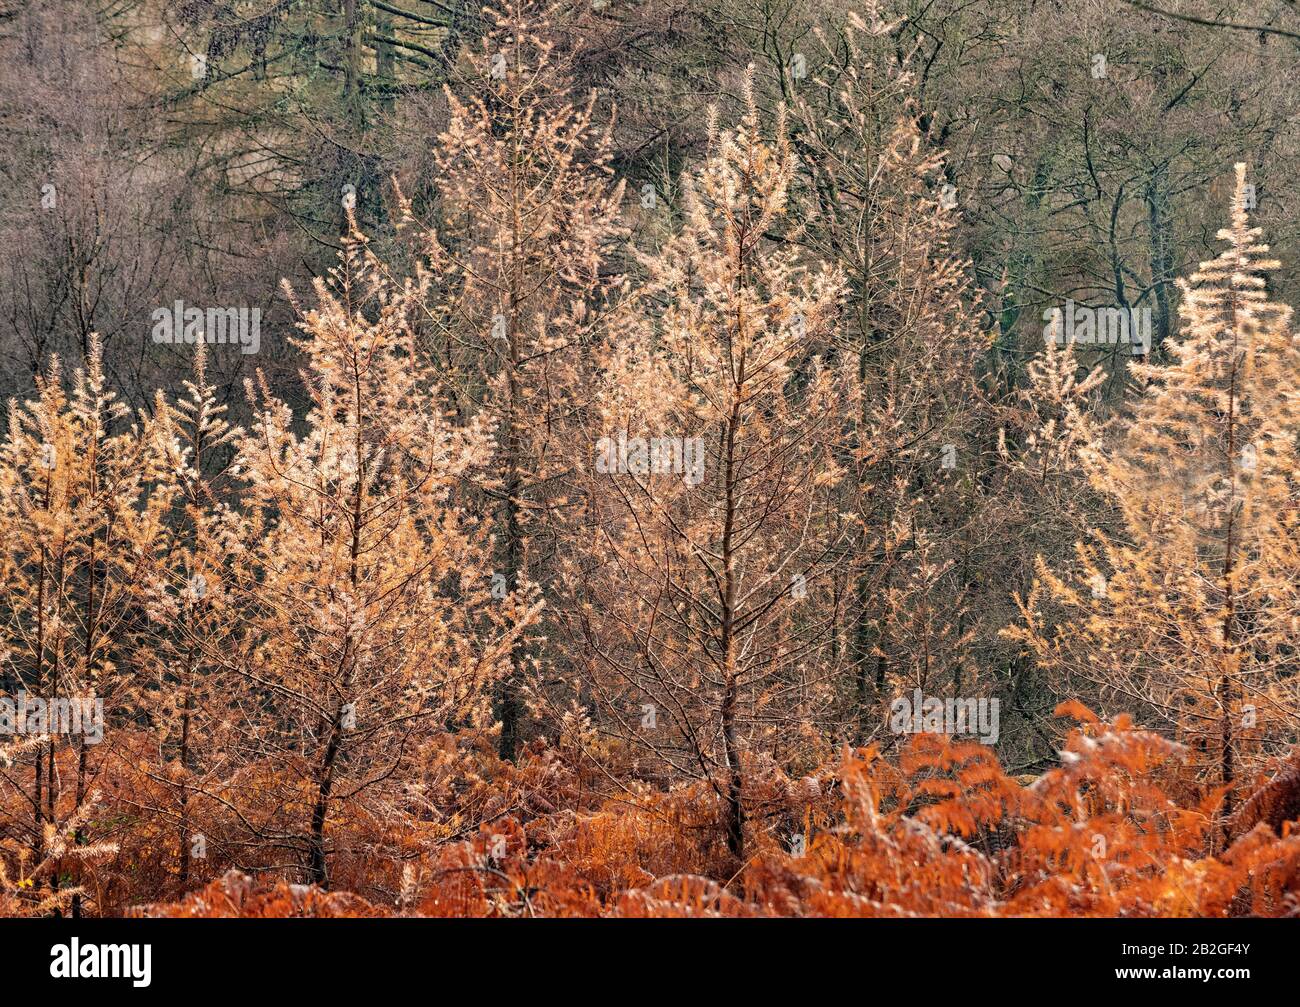 Close up of Larch trees, a coniferous tree in the forest of Cannock Chase. Latin name is Larix occidentalis it displays stunning golden foliage in Aut Stock Photo